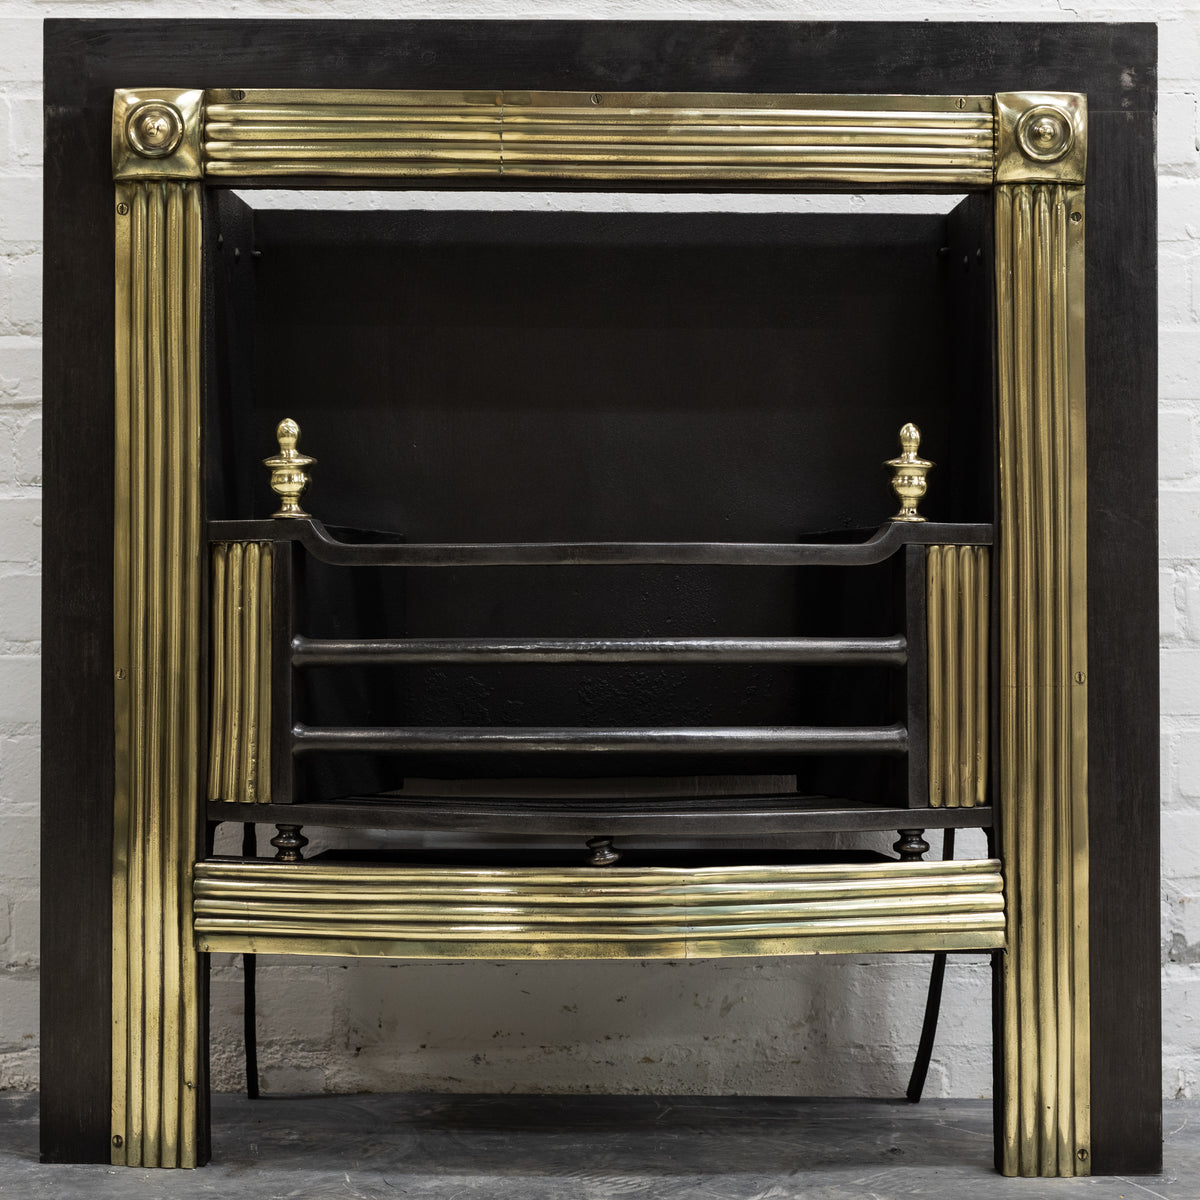 Splendid Antique Regency Hob Grate with Reeded Brass Frame | The Architectural Forum